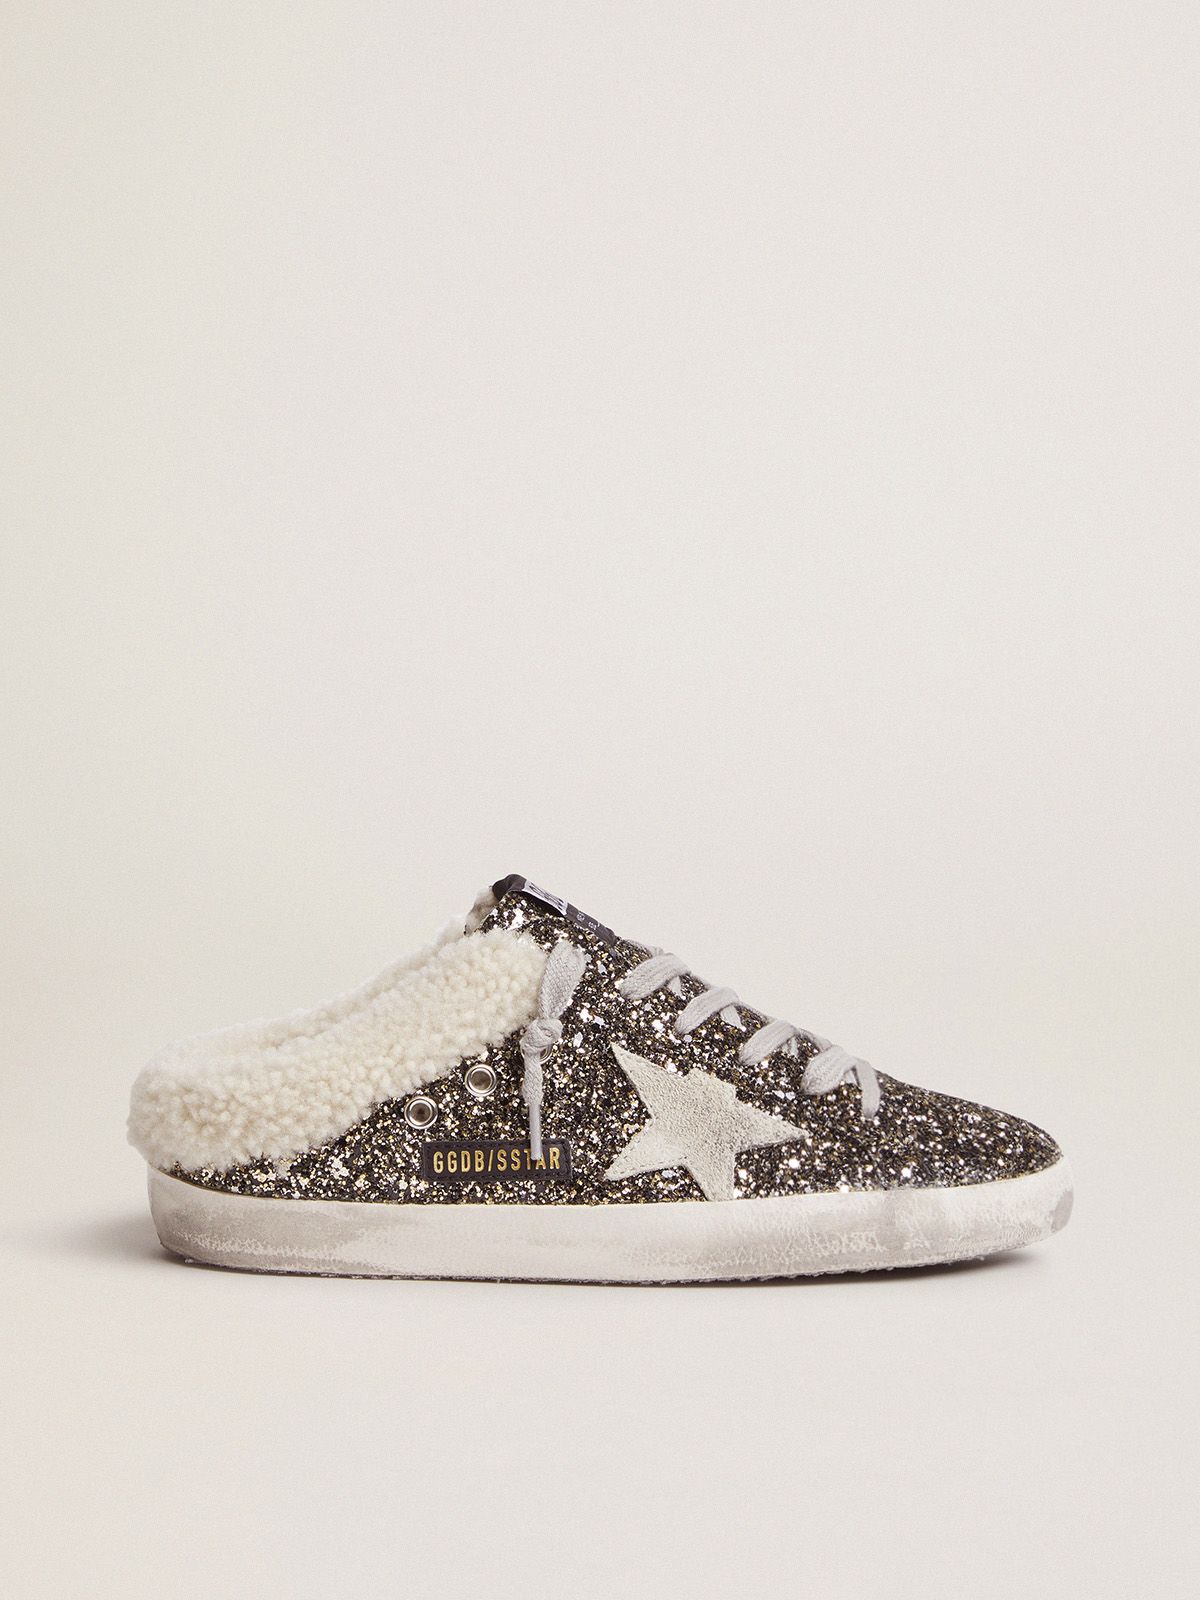 golden goose shearling and sabot-style glitter sneakers lining with Super-Star